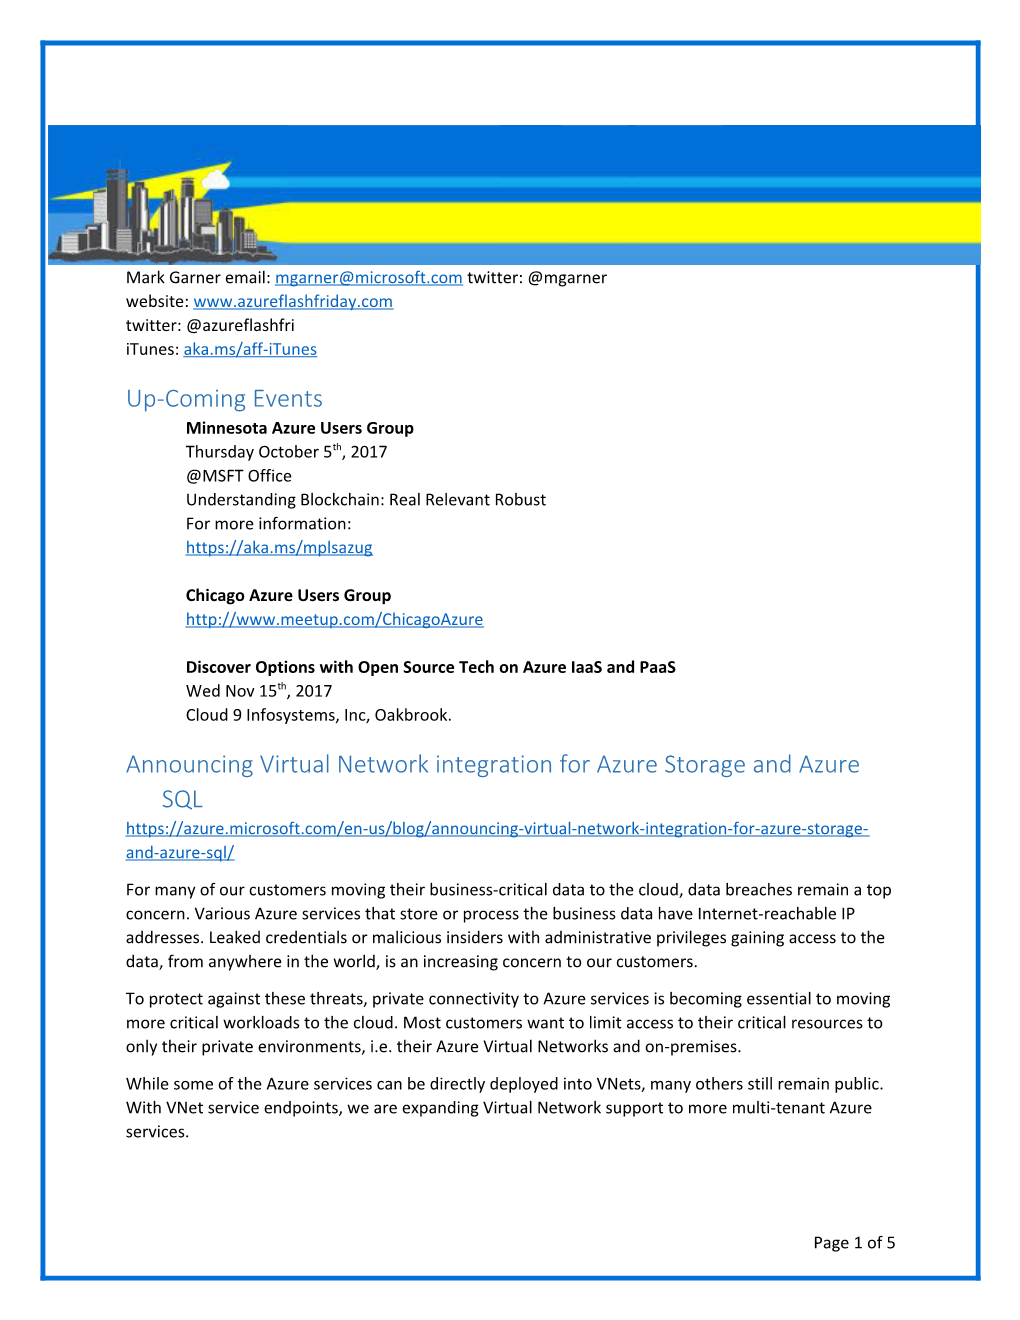 Announcing Virtual Network Integration for Azure Storage and Azure SQL